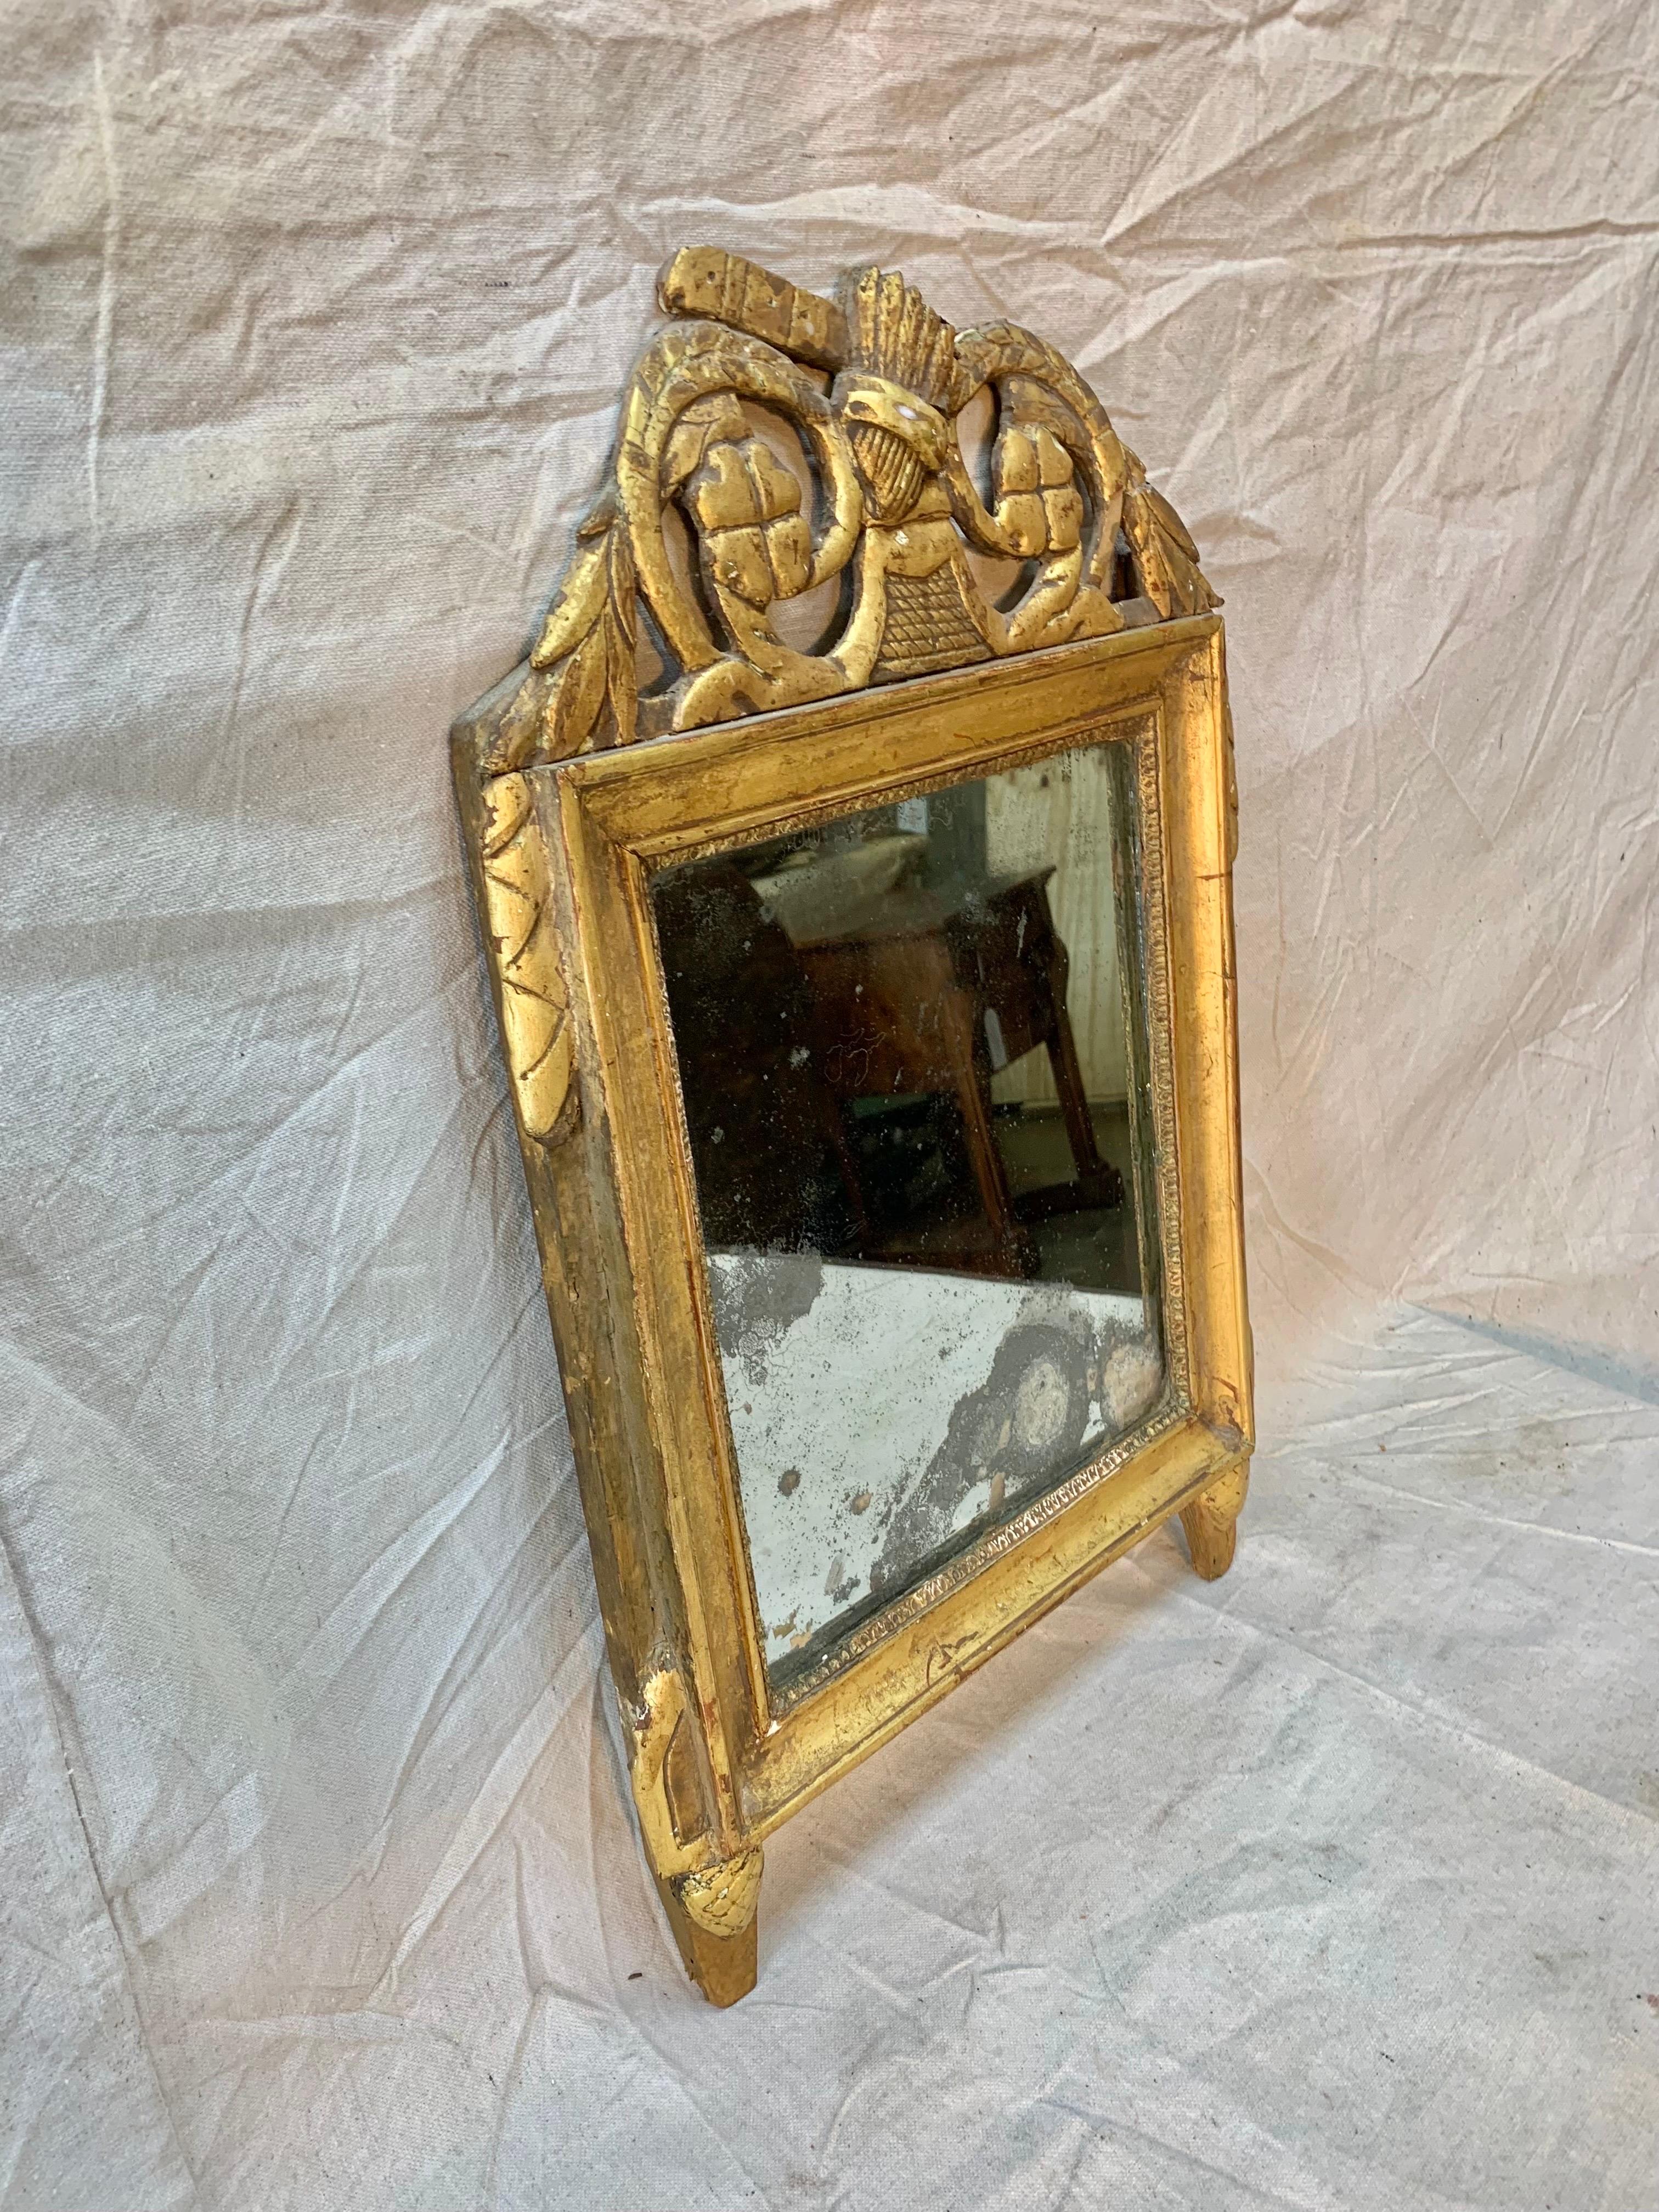 Presented as found, this beautiful Mid 18th Century Carved and Gilded French Wall Mirror features decorative details of foliage. The mirrored glass has some spotting and crazing which adds to the patina of the piece. Newly wired and ready to